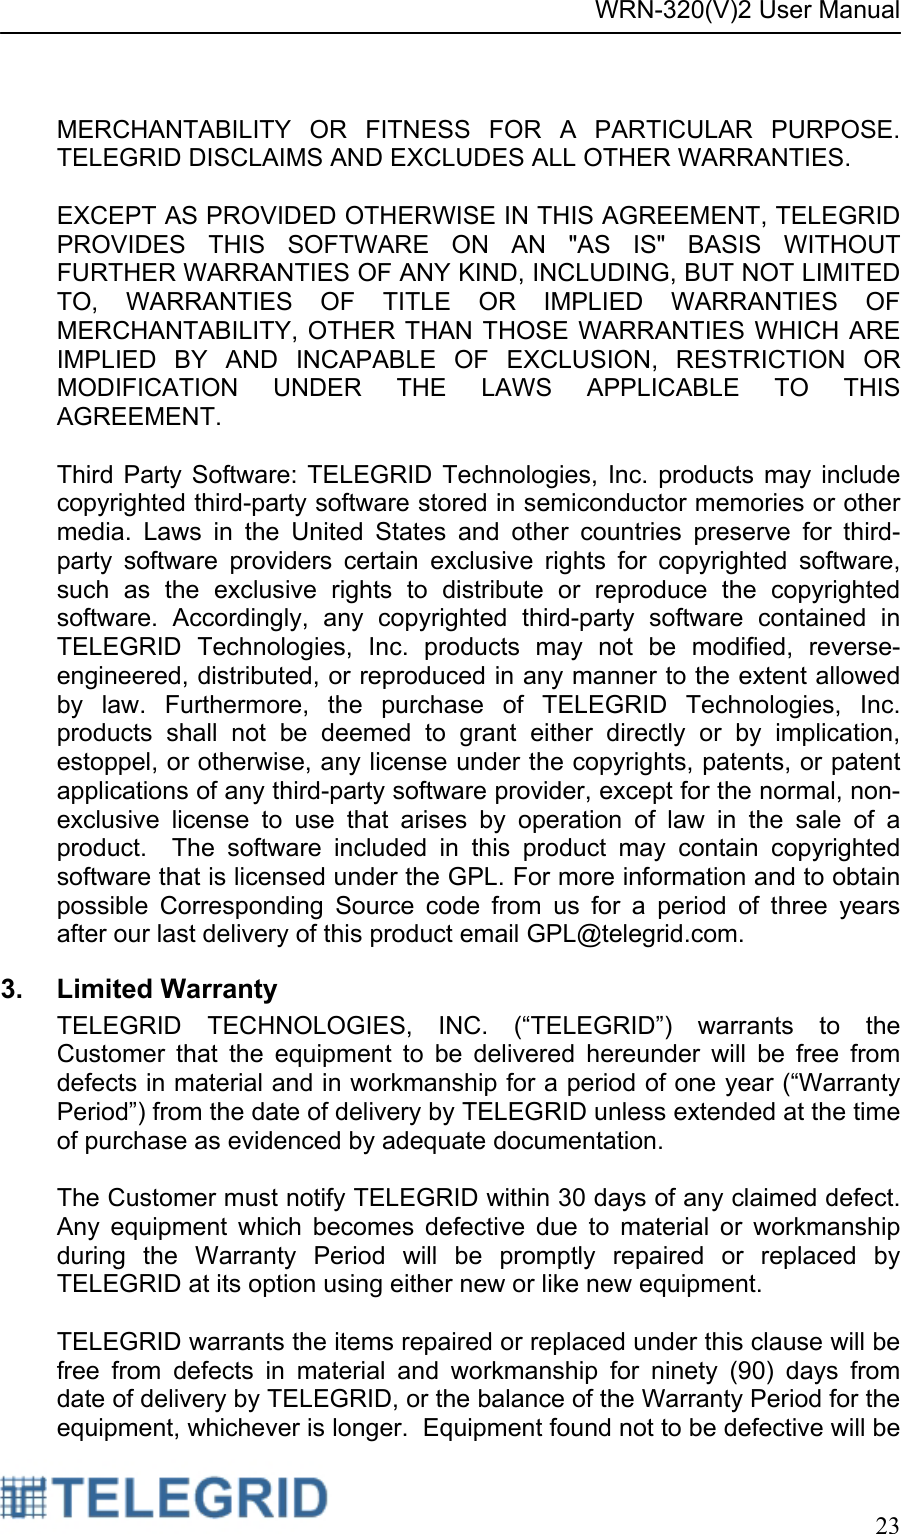 WRN-320(V)2 User Manual     23   MERCHANTABILITY OR FITNESS FOR A PARTICULAR PURPOSE.  TELEGRID DISCLAIMS AND EXCLUDES ALL OTHER WARRANTIES.  EXCEPT AS PROVIDED OTHERWISE IN THIS AGREEMENT, TELEGRID PROVIDES THIS SOFTWARE ON AN &quot;AS IS&quot; BASIS WITHOUT FURTHER WARRANTIES OF ANY KIND, INCLUDING, BUT NOT LIMITED TO, WARRANTIES OF TITLE OR IMPLIED WARRANTIES OF MERCHANTABILITY, OTHER THAN THOSE WARRANTIES WHICH ARE IMPLIED BY AND INCAPABLE OF EXCLUSION, RESTRICTION OR MODIFICATION UNDER THE LAWS APPLICABLE TO THIS AGREEMENT.    Third Party Software: TELEGRID Technologies, Inc. products may include copyrighted third-party software stored in semiconductor memories or other media. Laws in the United States and other countries preserve for third-party software providers certain exclusive rights for copyrighted software, such as the exclusive rights to distribute or reproduce the copyrighted software. Accordingly, any copyrighted third-party software contained in TELEGRID Technologies, Inc. products may not be modified, reverse-engineered, distributed, or reproduced in any manner to the extent allowed by law. Furthermore, the purchase of TELEGRID Technologies, Inc. products shall not be deemed to grant either directly or by implication, estoppel, or otherwise, any license under the copyrights, patents, or patent applications of any third-party software provider, except for the normal, non-exclusive license to use that arises by operation of law in the sale of a product.  The software included in this product may contain copyrighted software that is licensed under the GPL. For more information and to obtain possible Corresponding Source code from us for a period of three years after our last delivery of this product email GPL@telegrid.com. 3. Limited Warranty TELEGRID TECHNOLOGIES, INC. (“TELEGRID”) warrants to the Customer that the equipment to be delivered hereunder will be free from defects in material and in workmanship for a period of one year (“Warranty Period”) from the date of delivery by TELEGRID unless extended at the time of purchase as evidenced by adequate documentation.  The Customer must notify TELEGRID within 30 days of any claimed defect.  Any equipment which becomes defective due to material or workmanship during the Warranty Period will be promptly repaired or replaced by TELEGRID at its option using either new or like new equipment.  TELEGRID warrants the items repaired or replaced under this clause will be free from defects in material and workmanship for ninety (90) days from date of delivery by TELEGRID, or the balance of the Warranty Period for the equipment, whichever is longer.  Equipment found not to be defective will be 